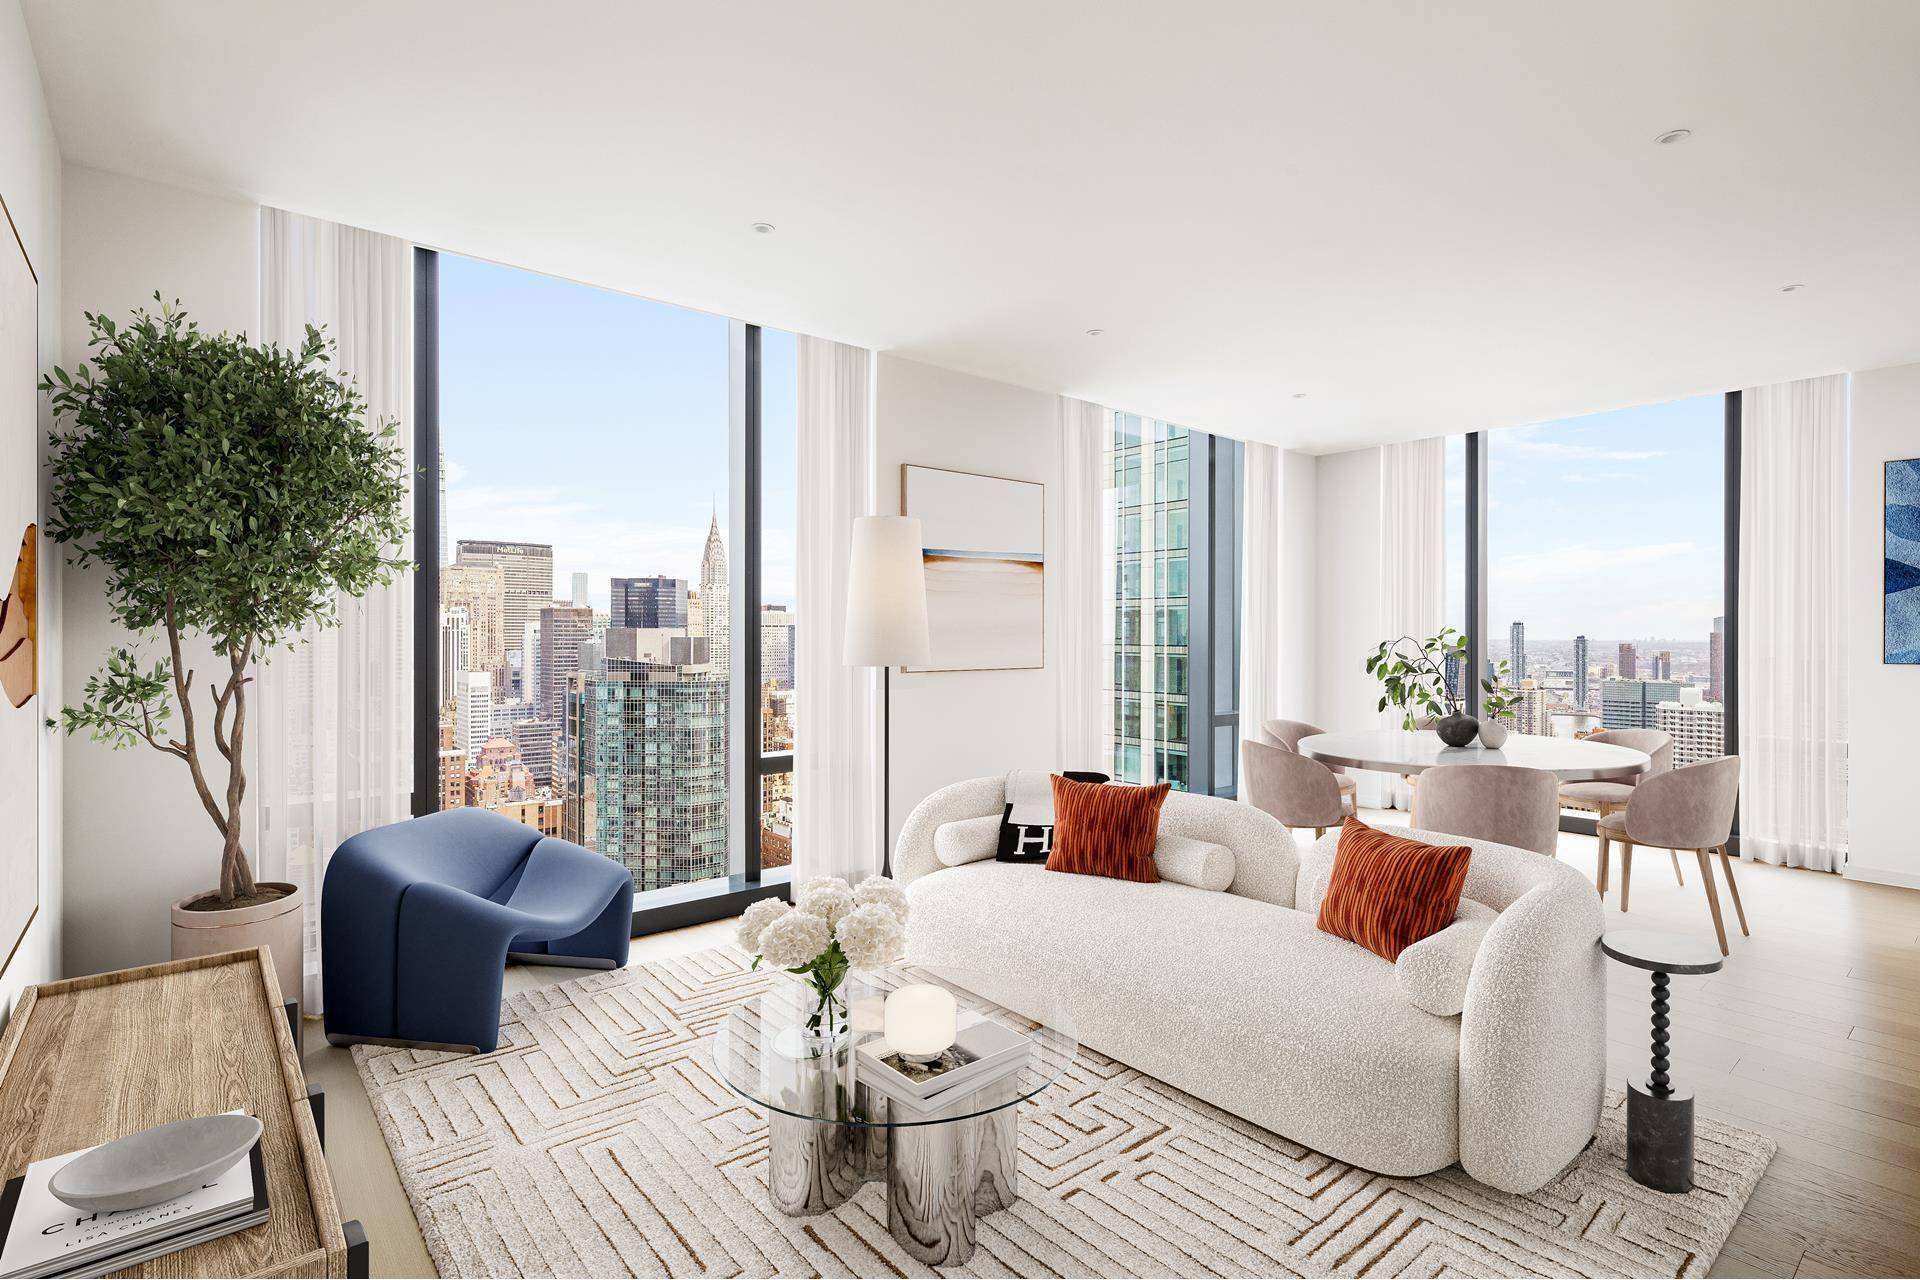 IMMEDIATE OCCUPANCY AT THE TALLEST RESIDENTIAL CONDOMINIUM ON FIFTH AVENUE.